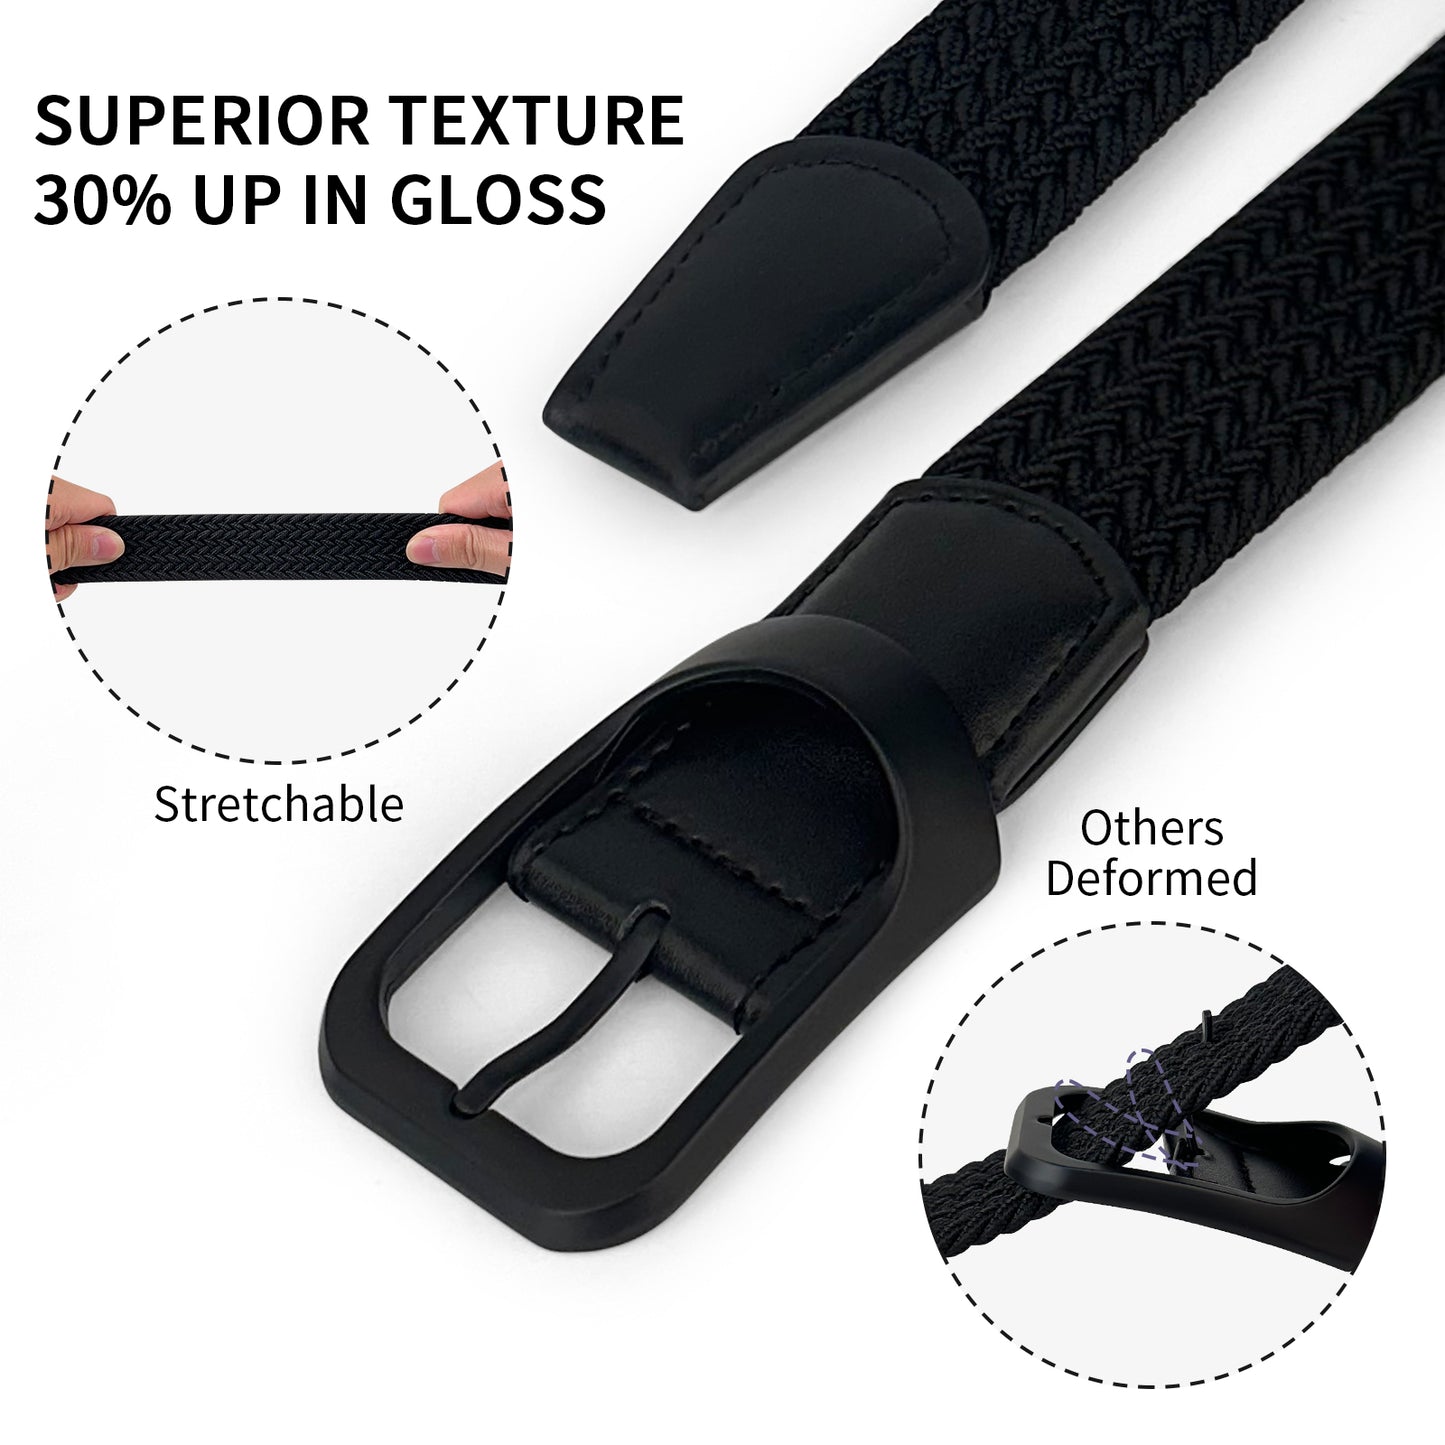 Black Elastic Braided Leather Golf Belt Casual Woven Stretch Belts Free Size For Golf Pants Casual Shorts Jeans